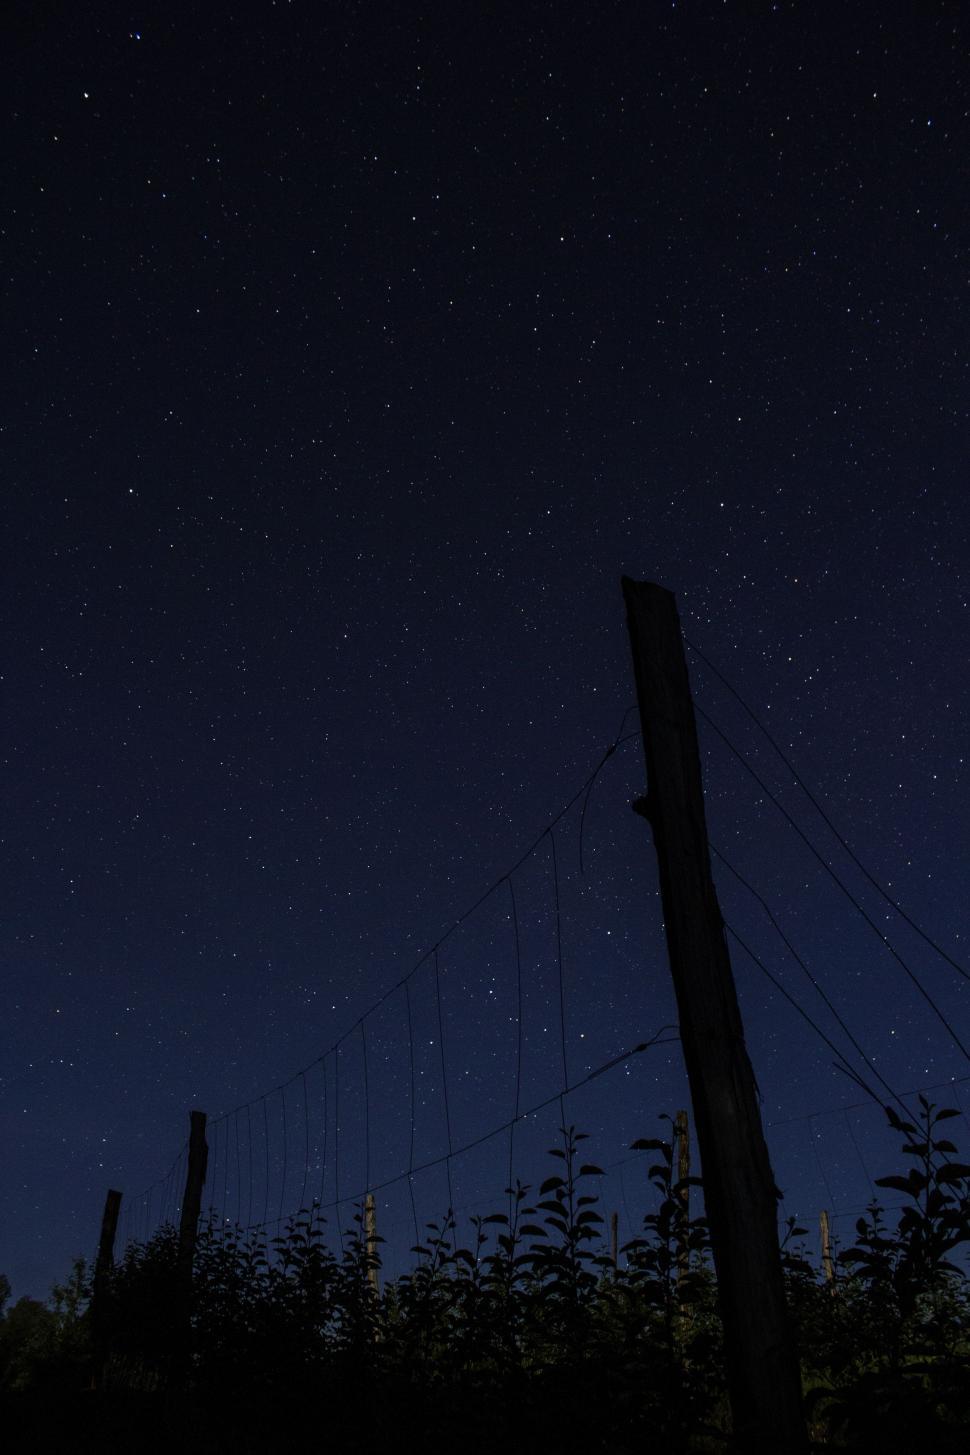 Free Image of Night Sky With Stars and Telephone Pole 